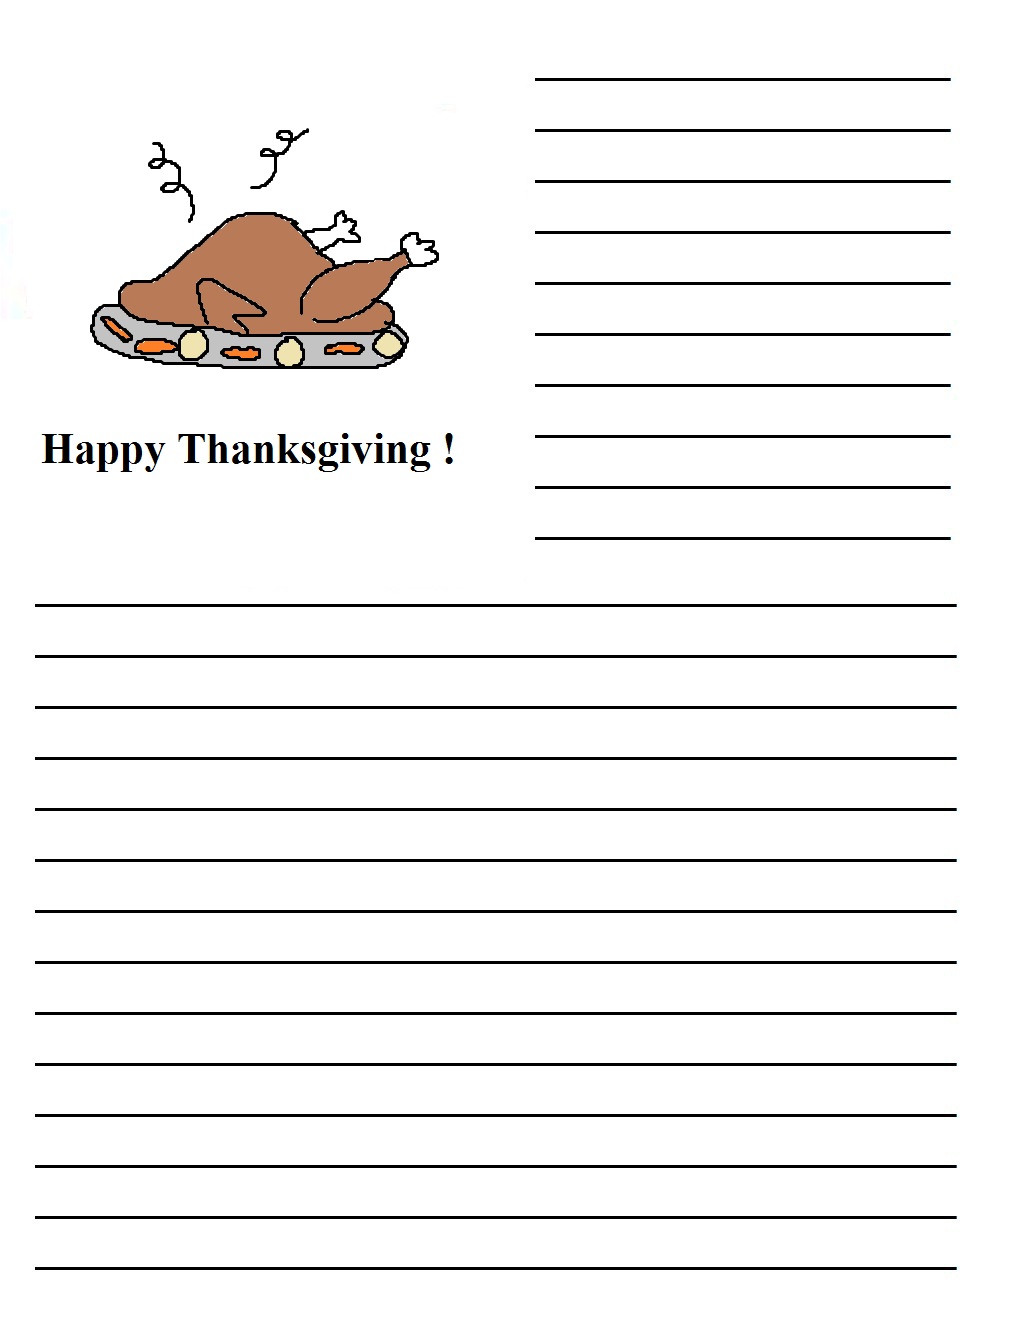 thanksgiving writing assignments for middle school